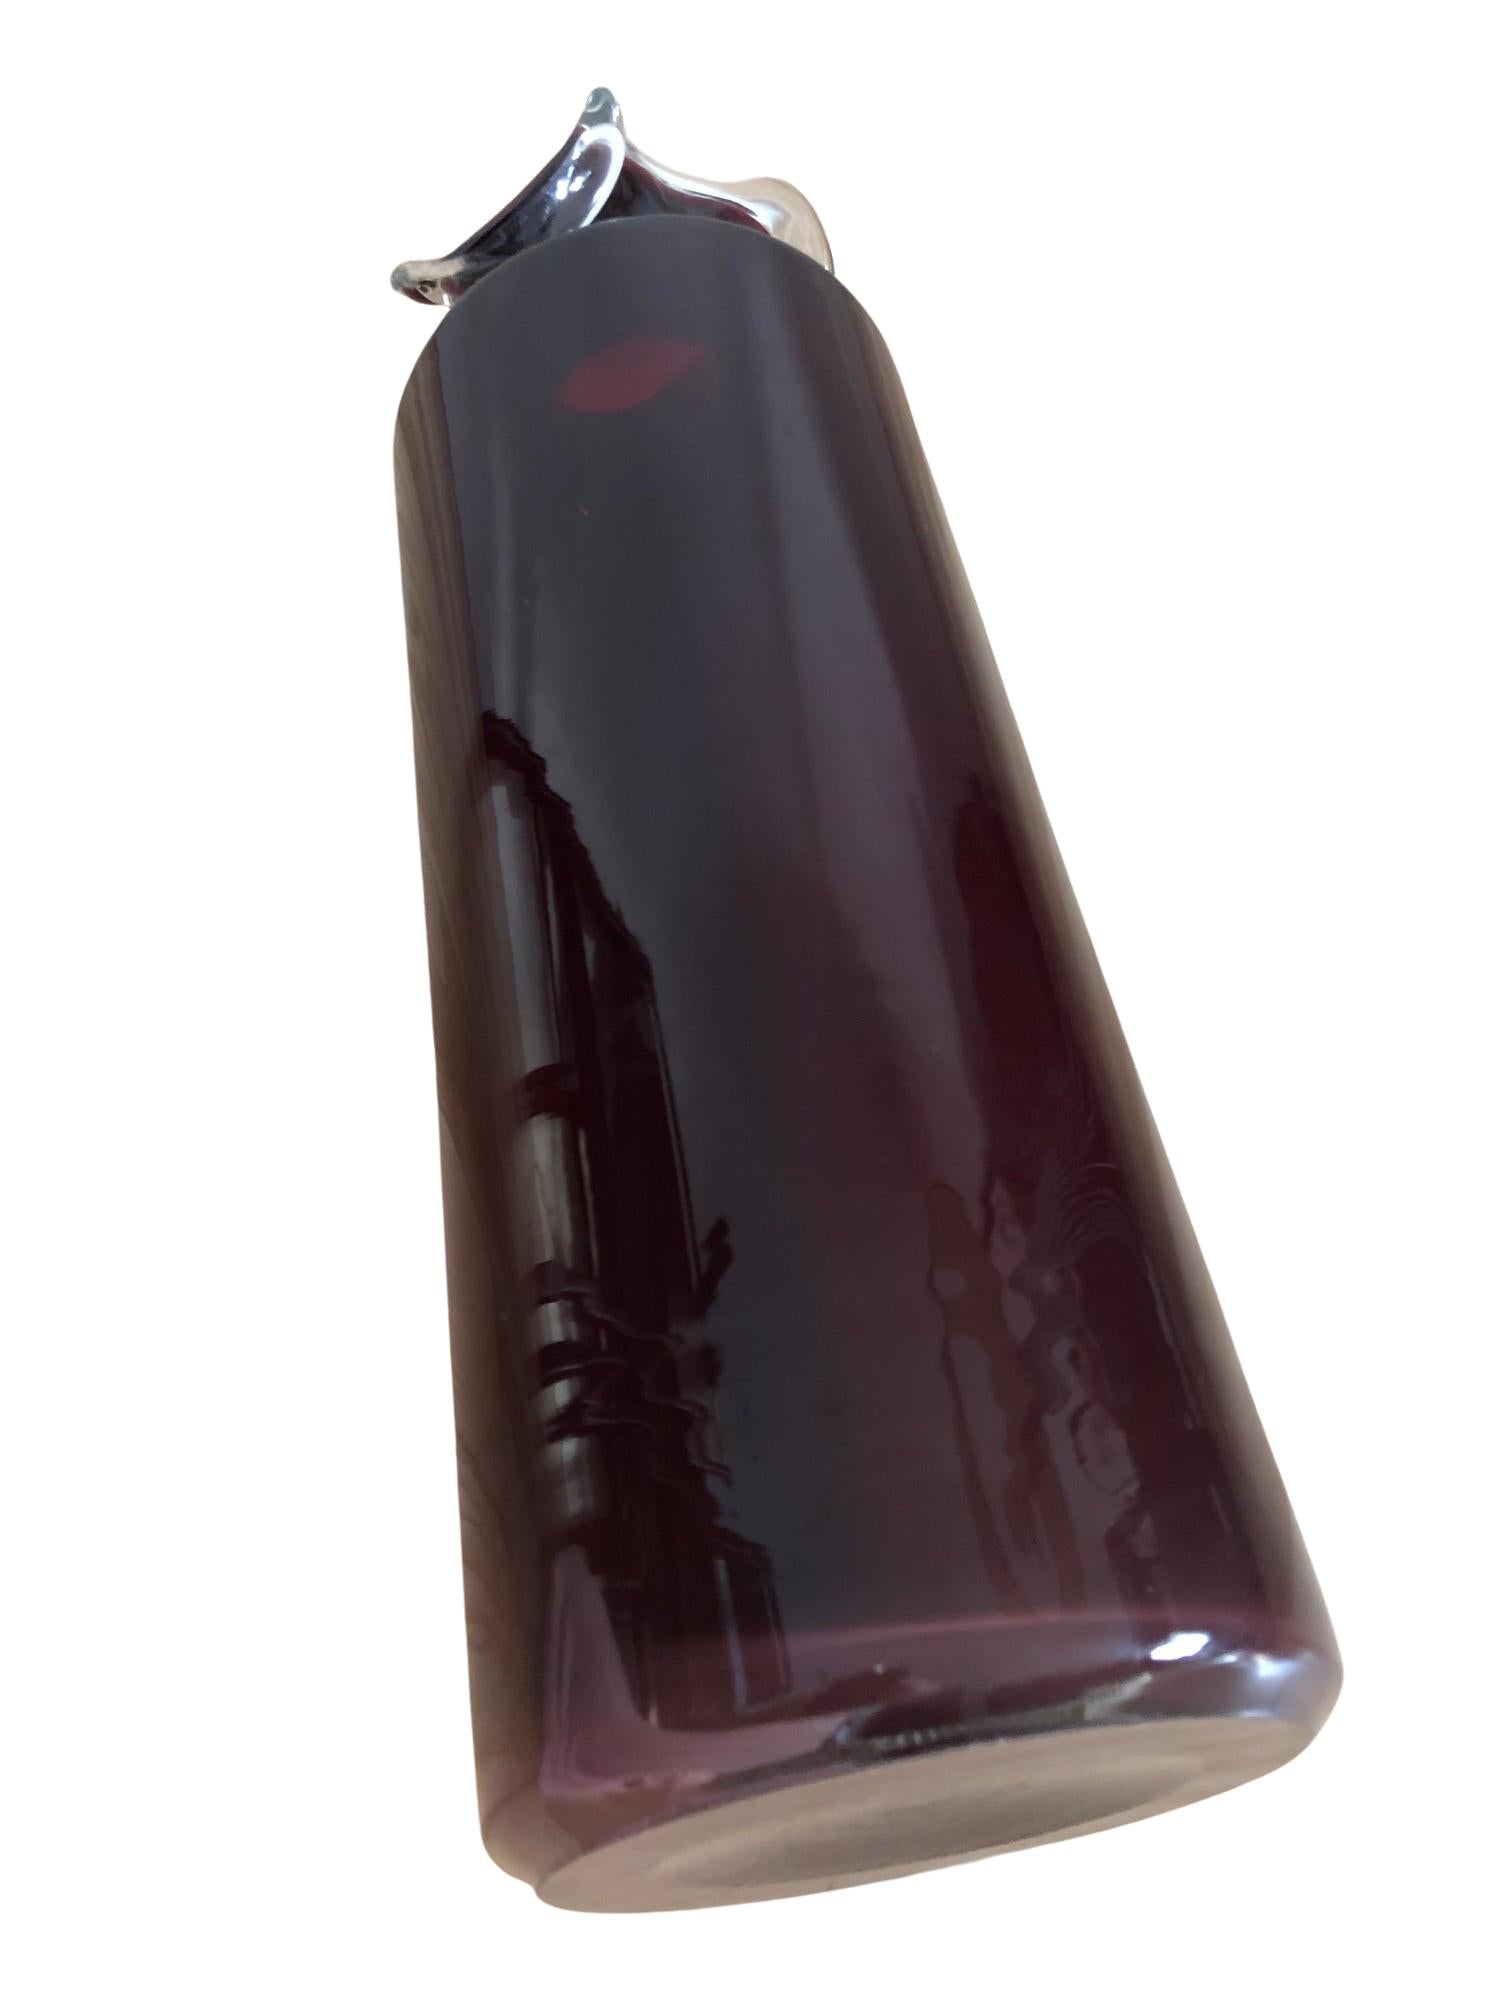 20th Century Large Burgundy Vase with a Frill, Tarnowiec Glassworks, Poland, 1970s For Sale